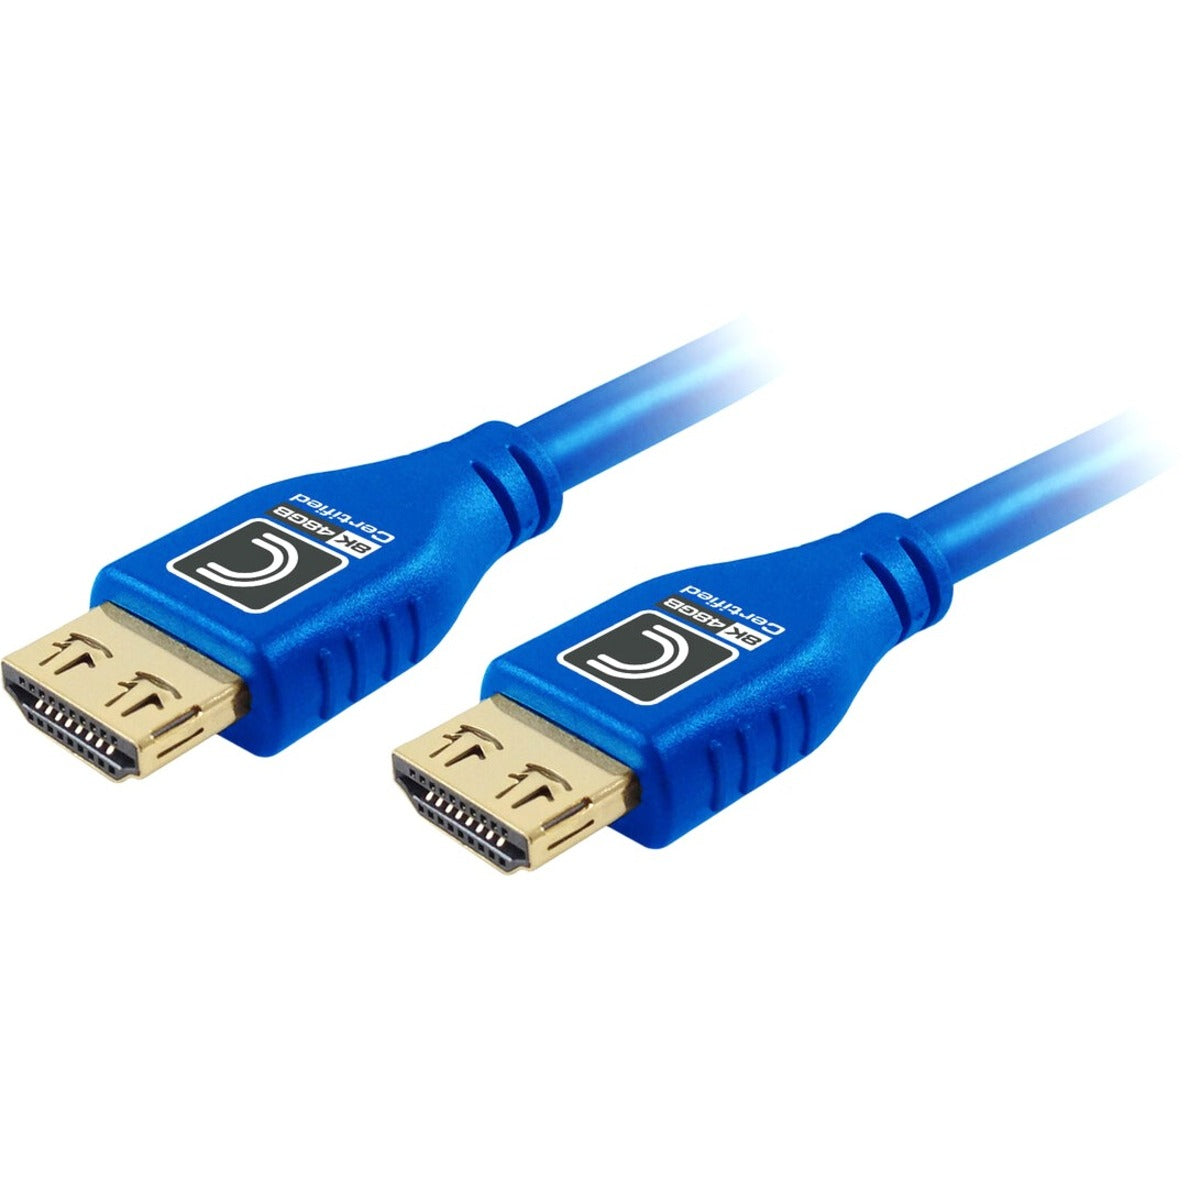 Comprehensive MHD48G-9PROBLU MicroFlex Pro AV/IT HDMI A/V Cable, 9 ft, EMI/RF Protection, Ultra Flexible, Gold Plated